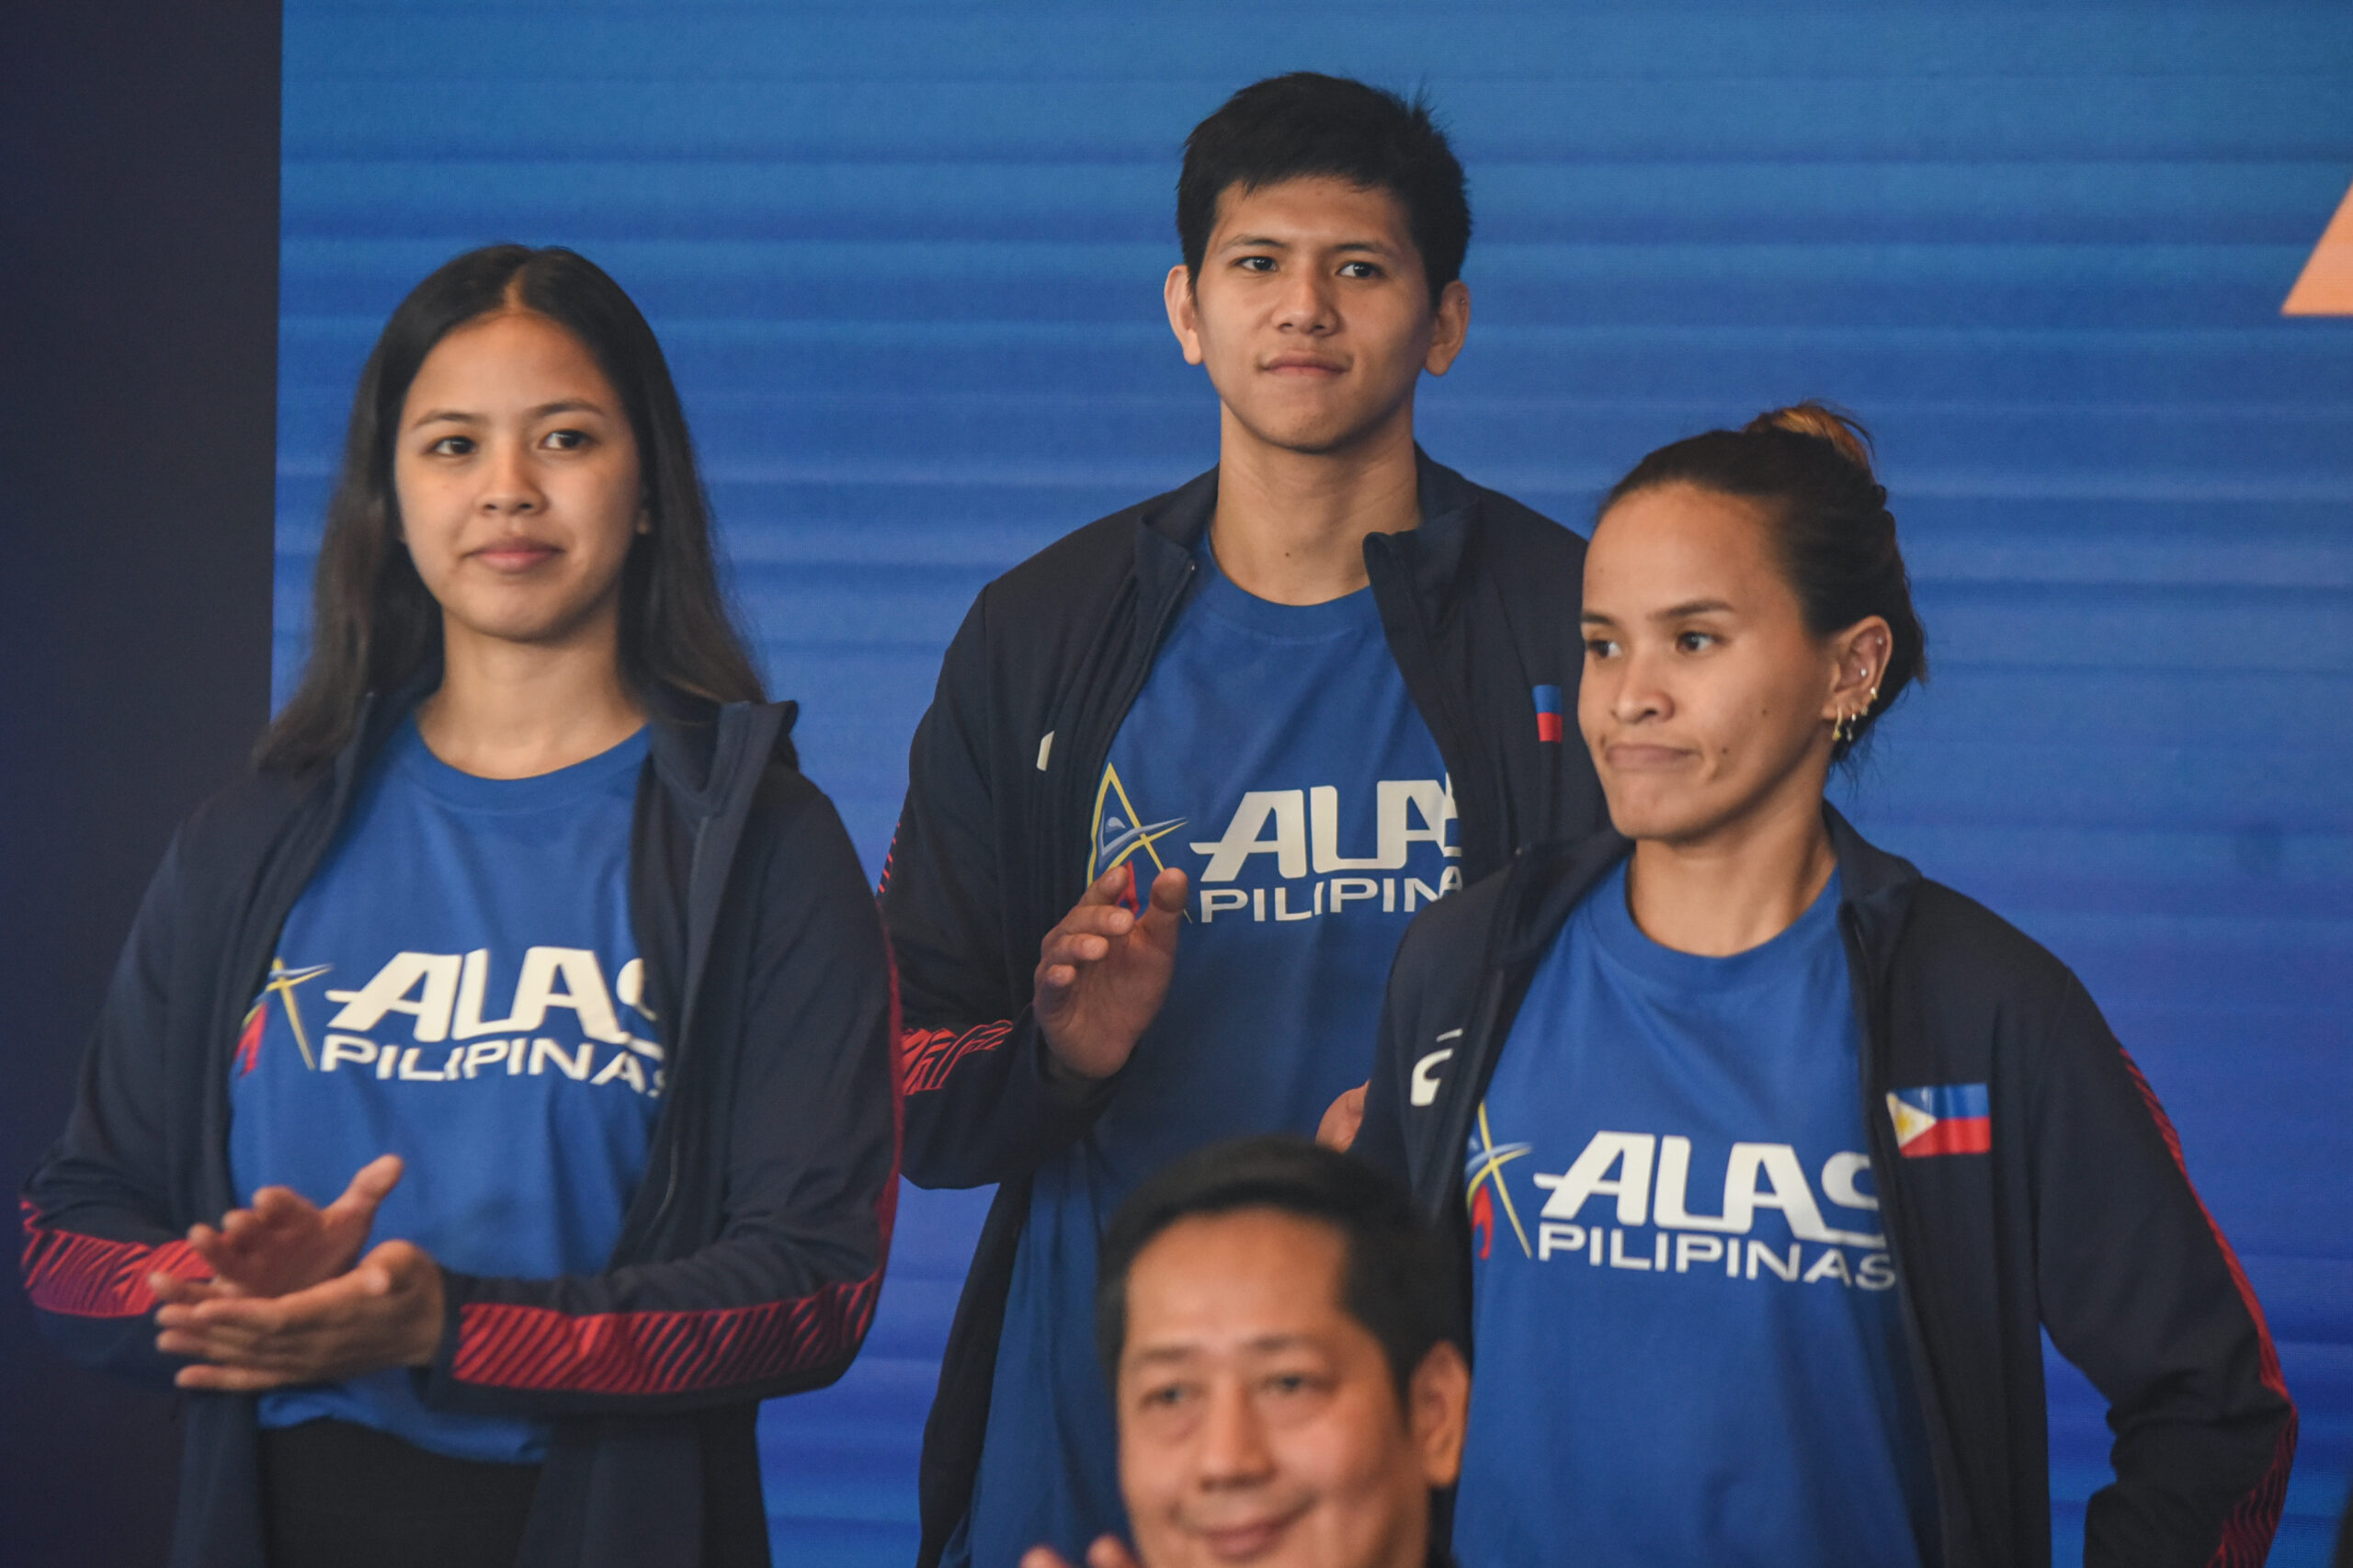 Former UST teammates Eya Laure and Sisi Rondina headline Alas Pilipinas for the AVC Challenge Cup.